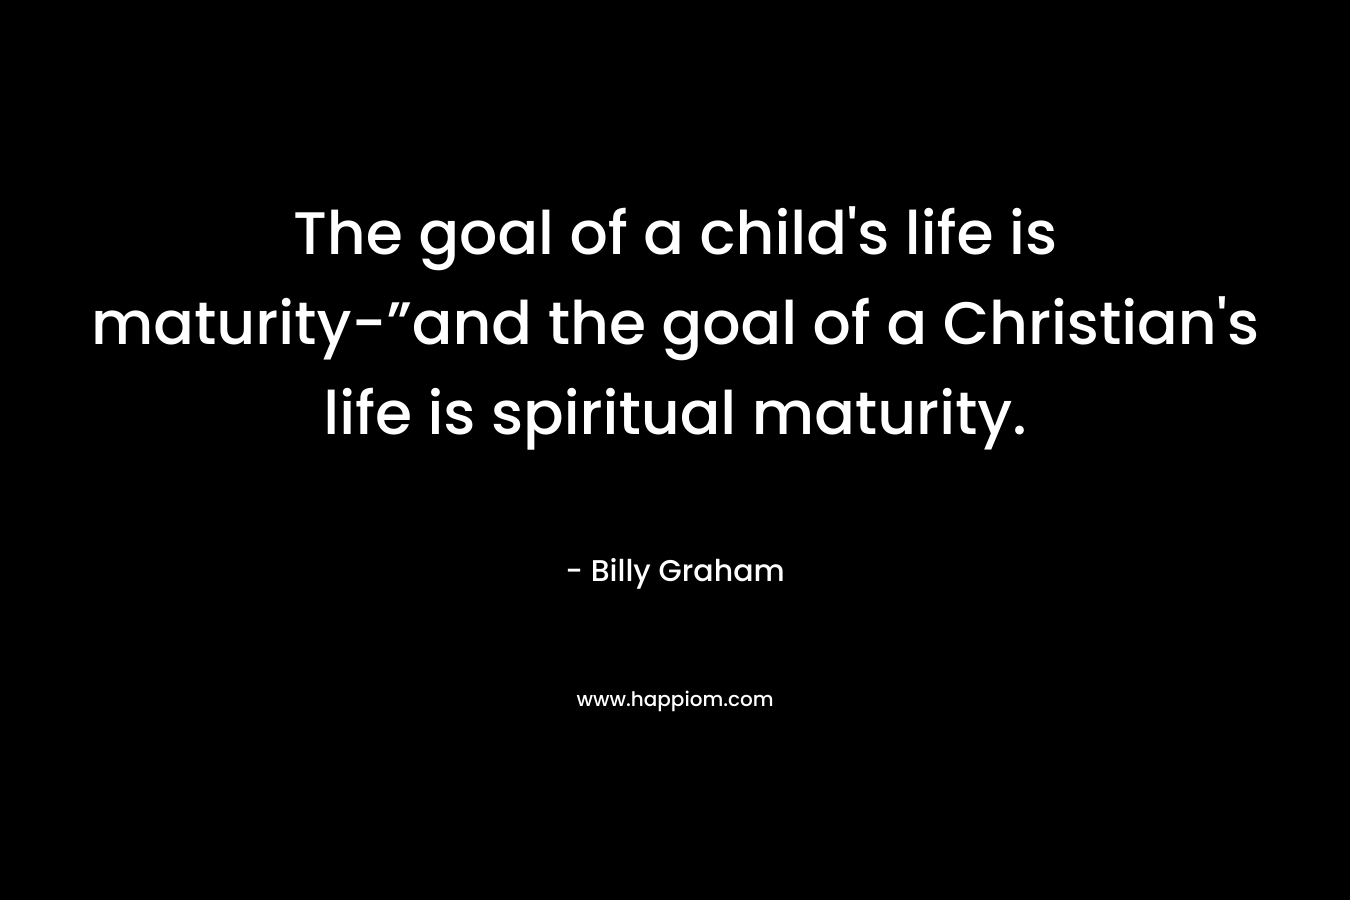 The goal of a child's life is maturity-”and the goal of a Christian's life is spiritual maturity.